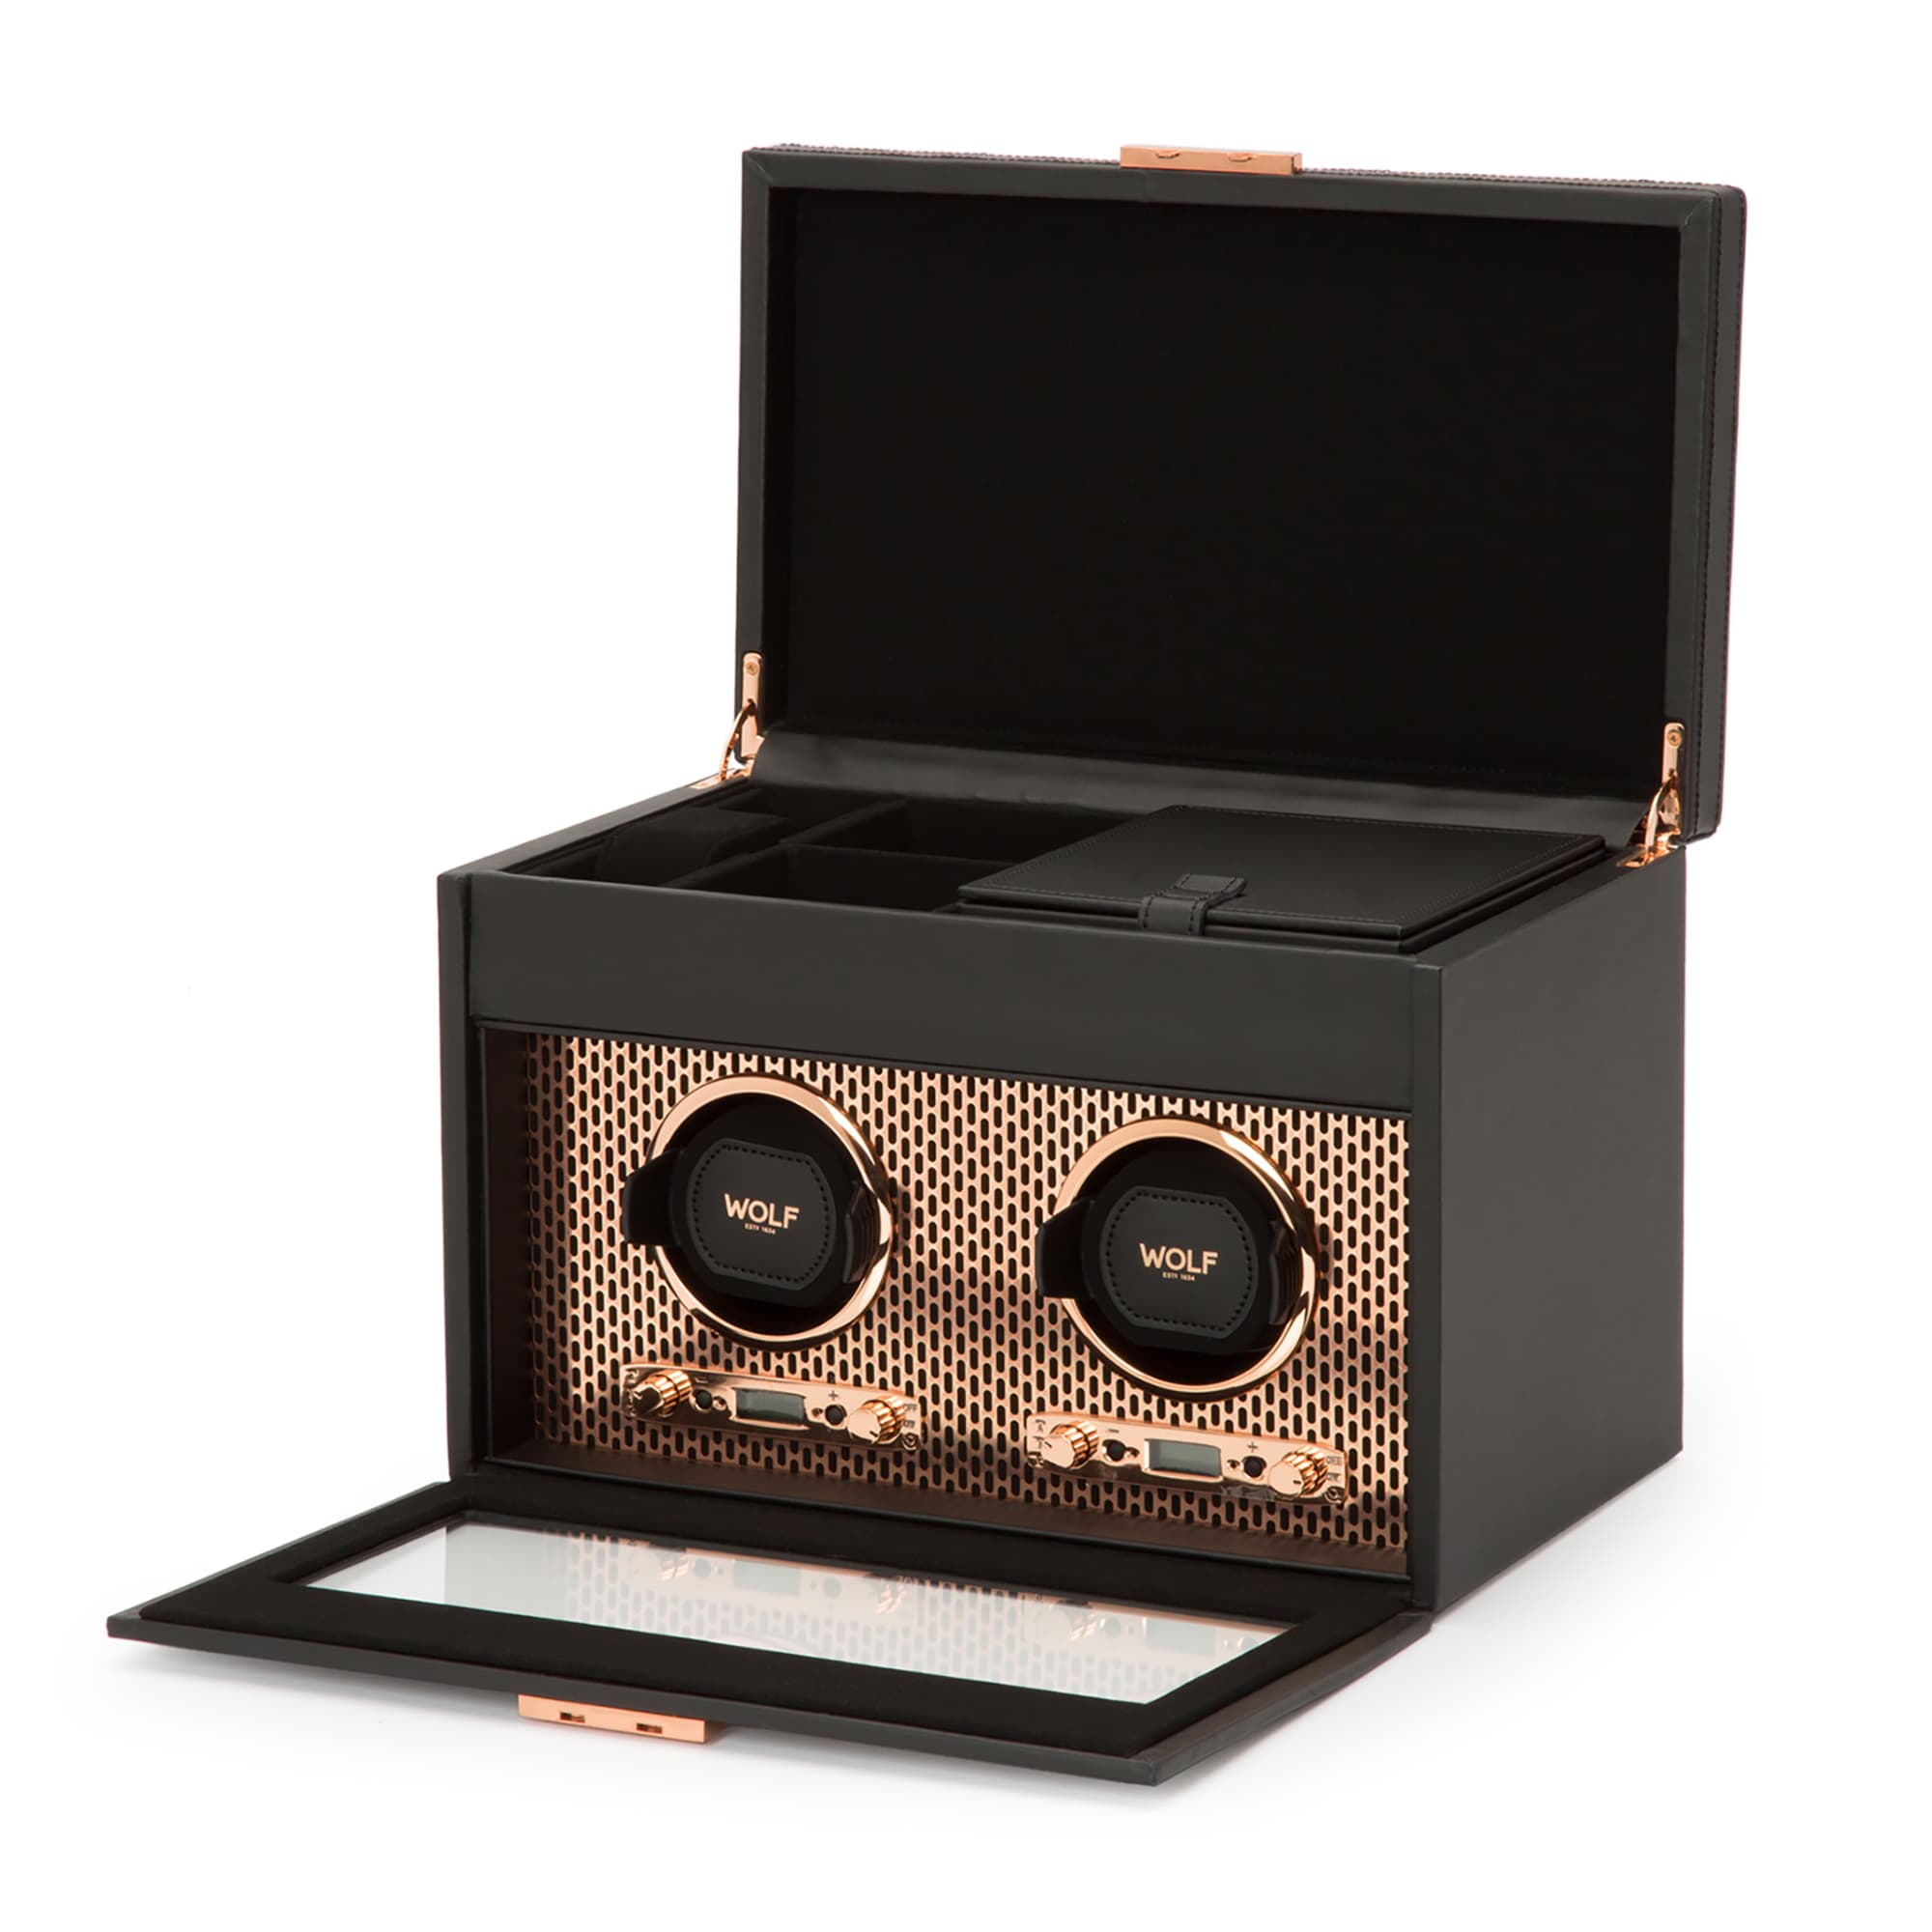 Wolf-Axis-Double-Watch-Winder-with-Storage-Copper-469316-2